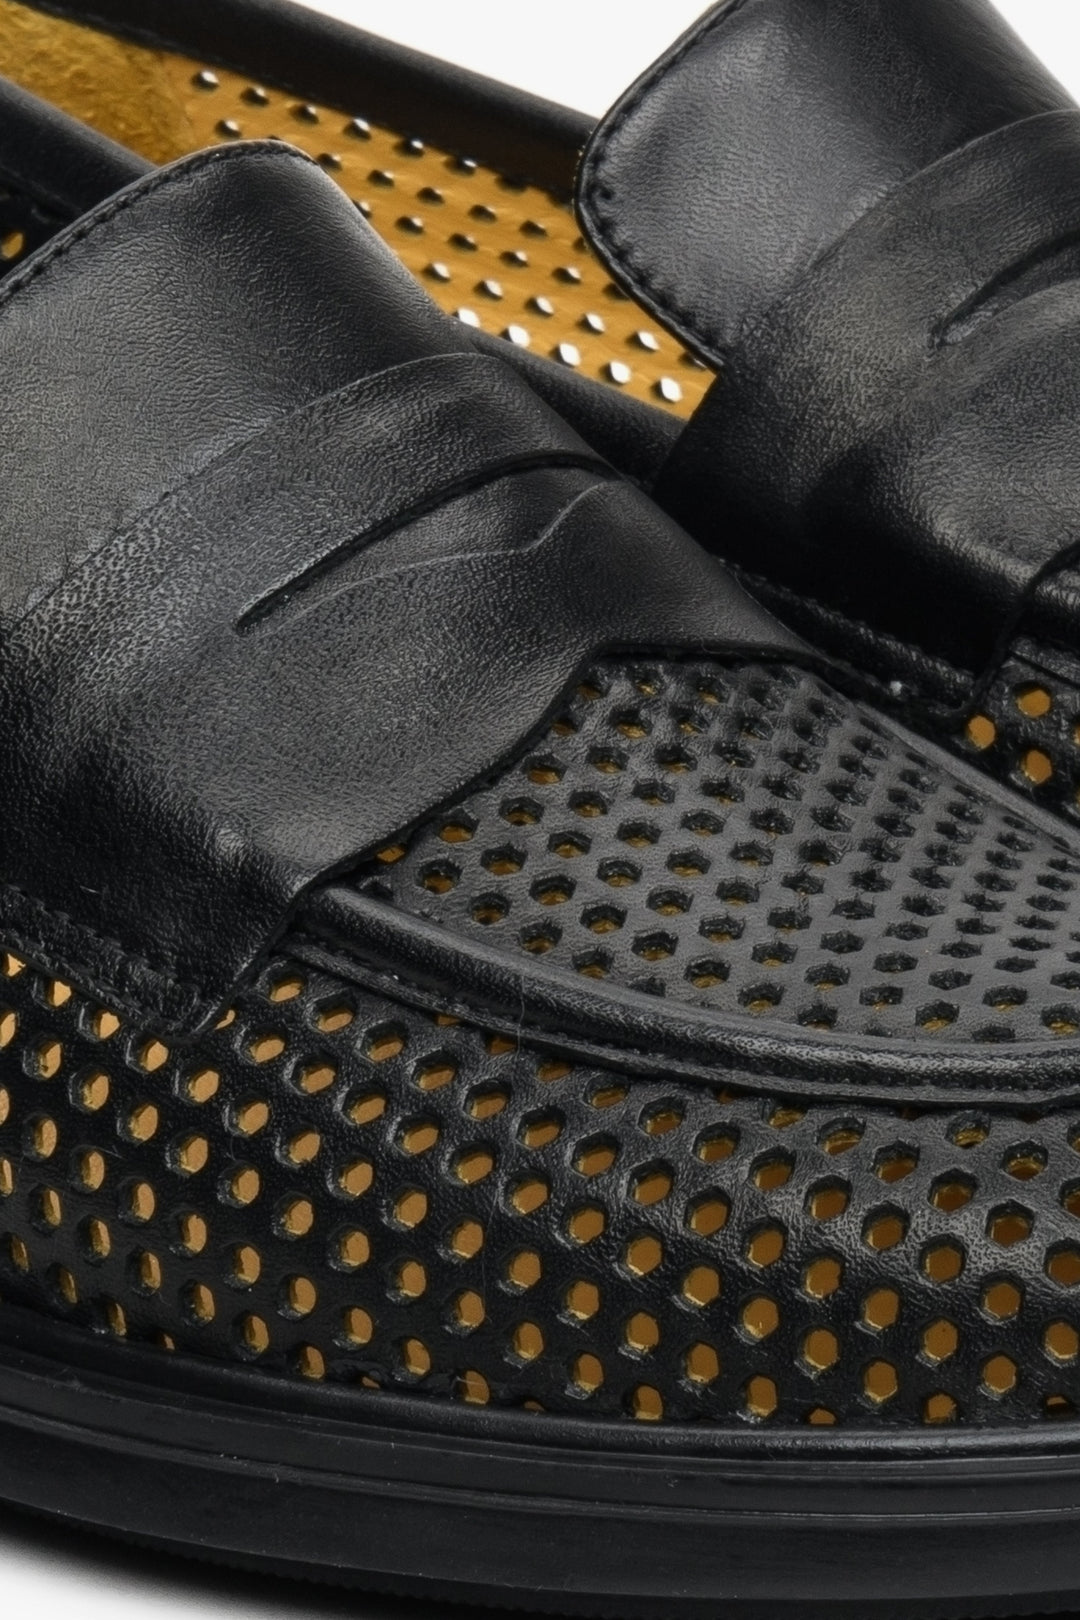 Women's Black natural leather loafers by Estro - close-up on the stitching and perforation pattern.